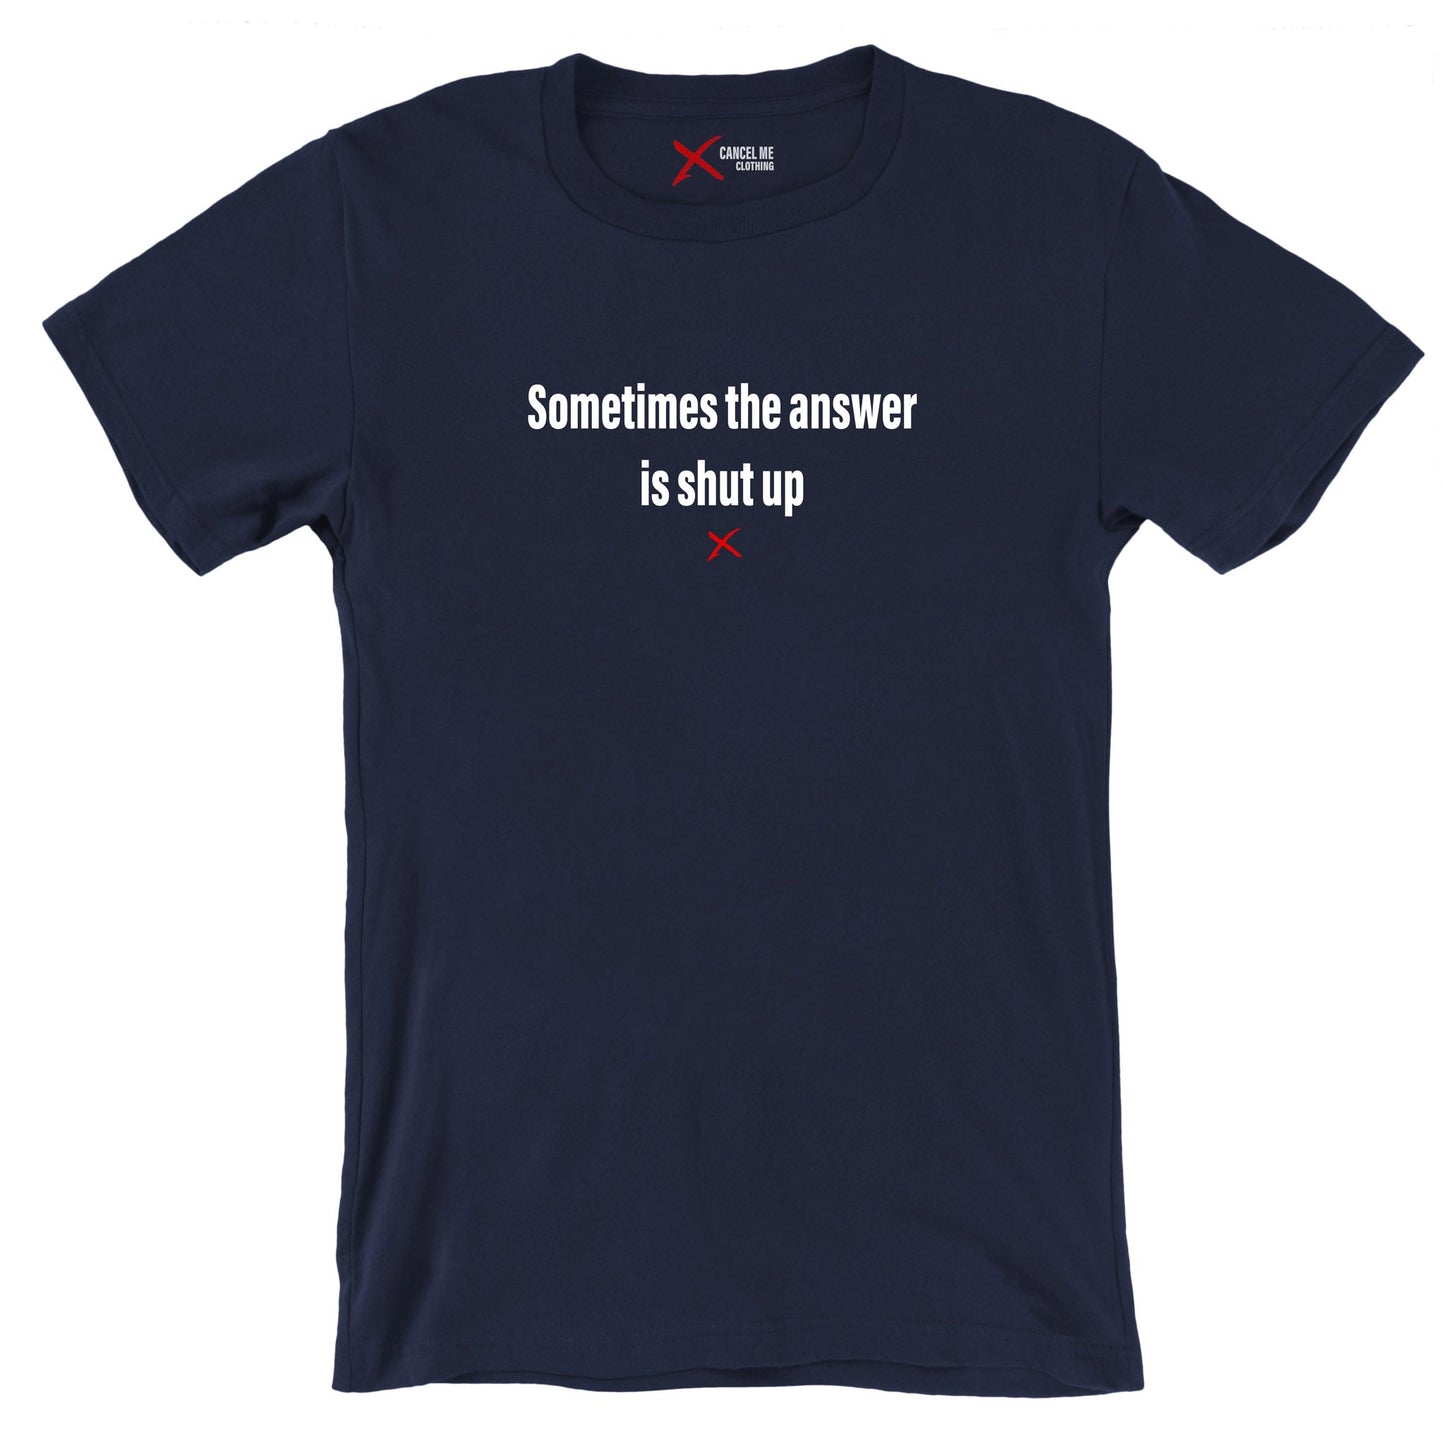 Sometimes the answer is shut up - Shirt